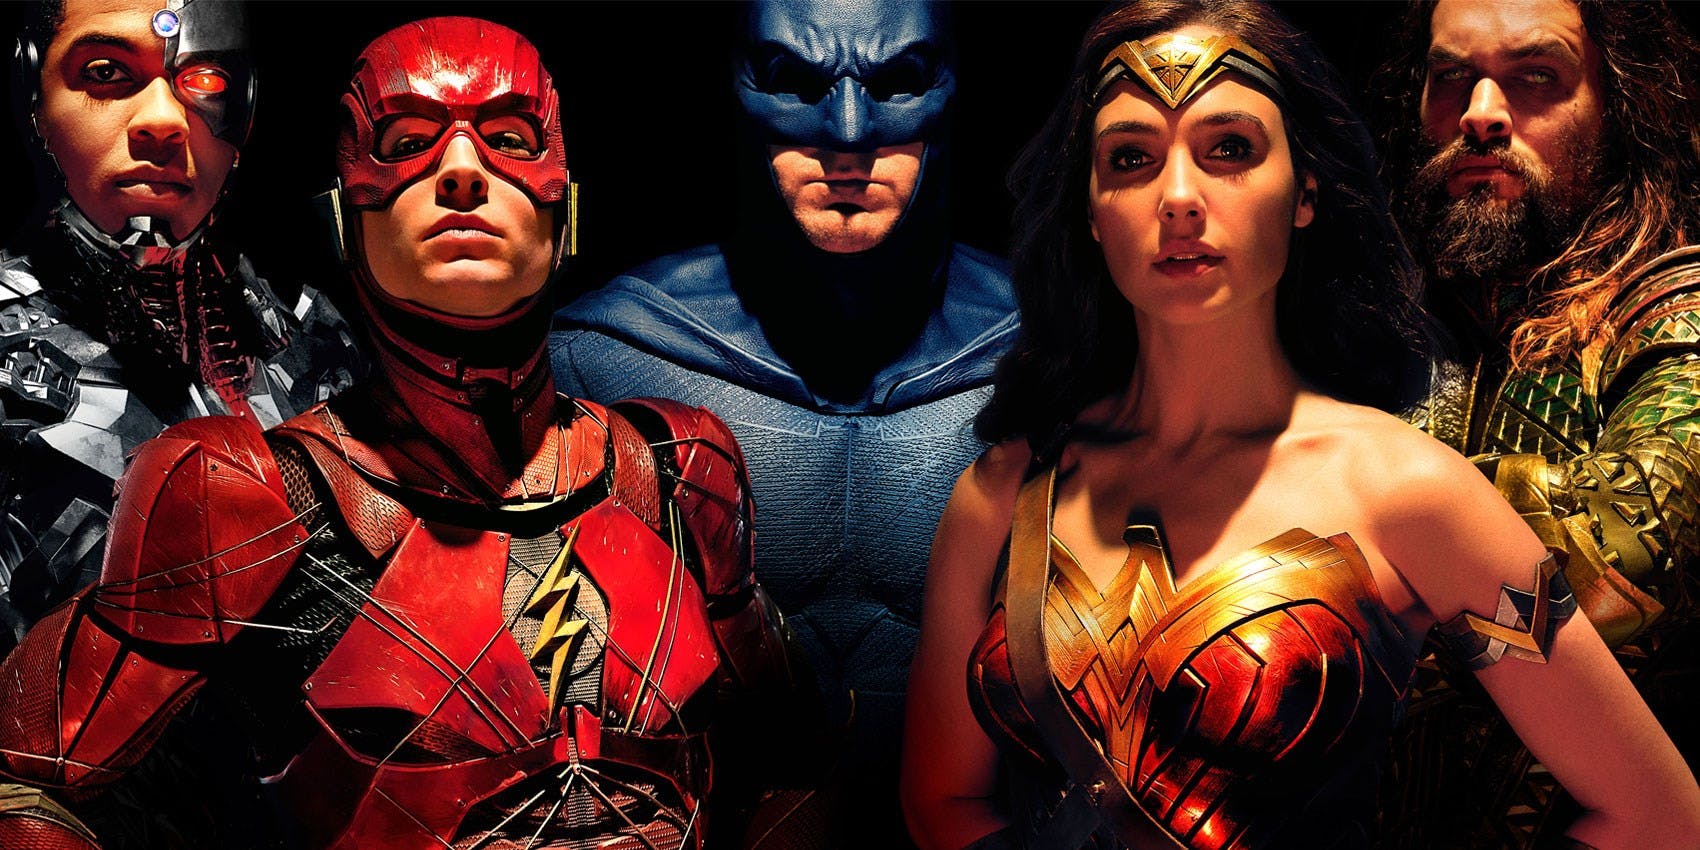 Meanwhile…. JUSTICE LEAGUE Makes Slight Improvements from the Other Miserable DC Movies